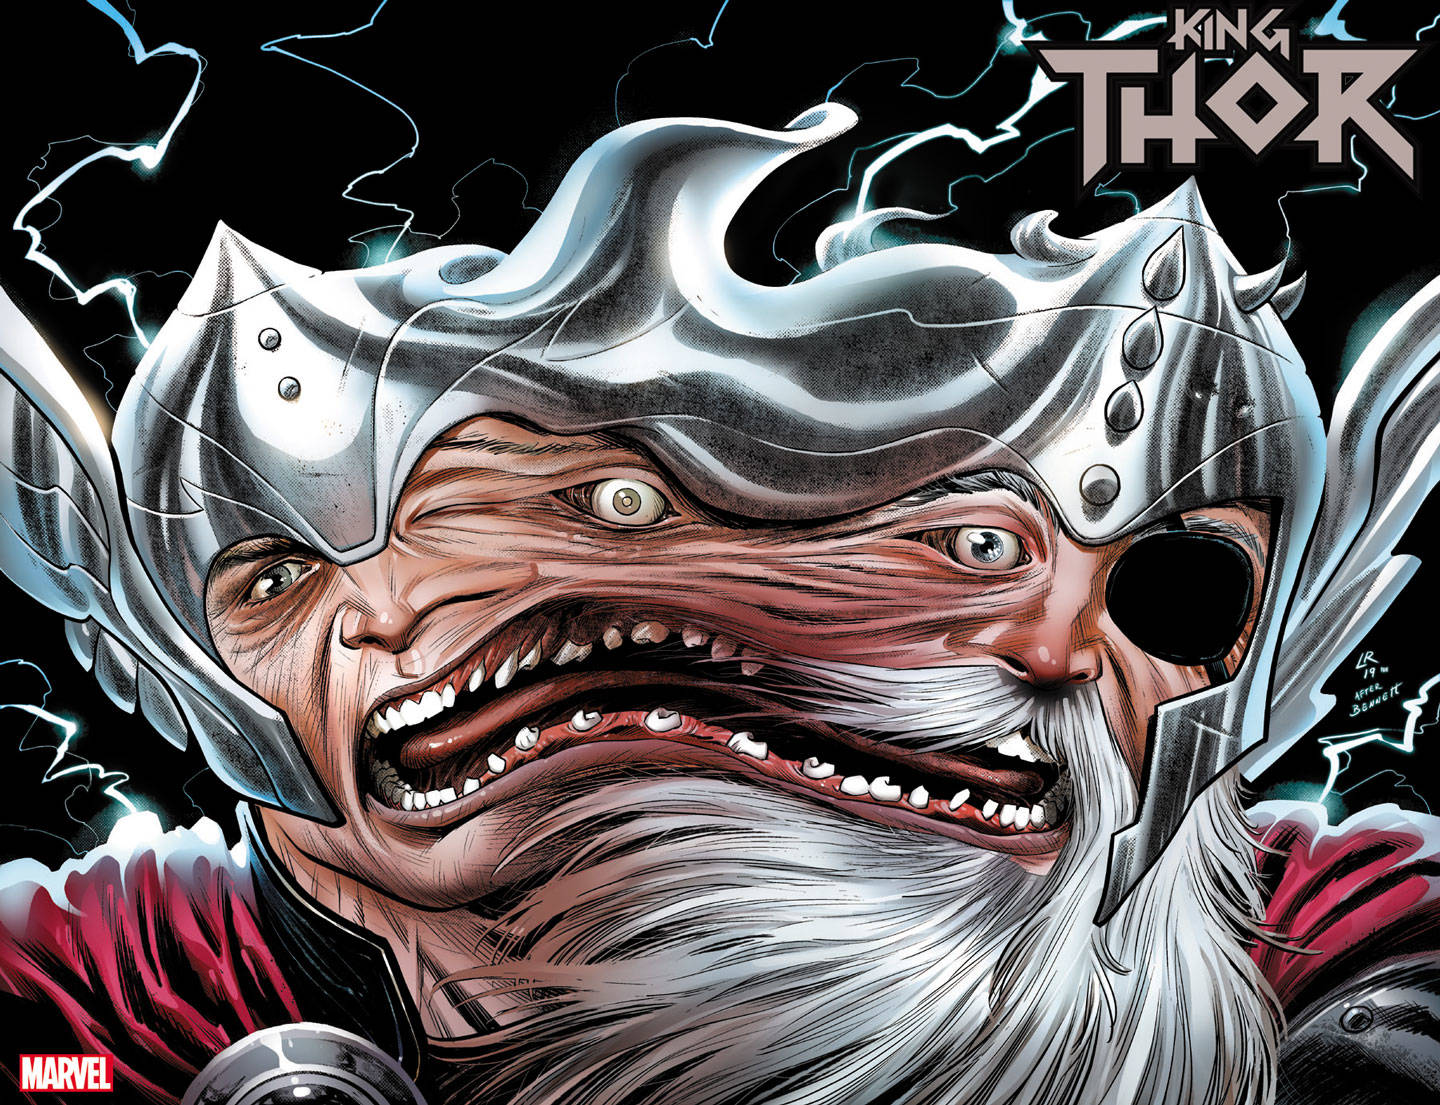 King Thor #1 Ross Immortal Wraparound Variant (Of 4)